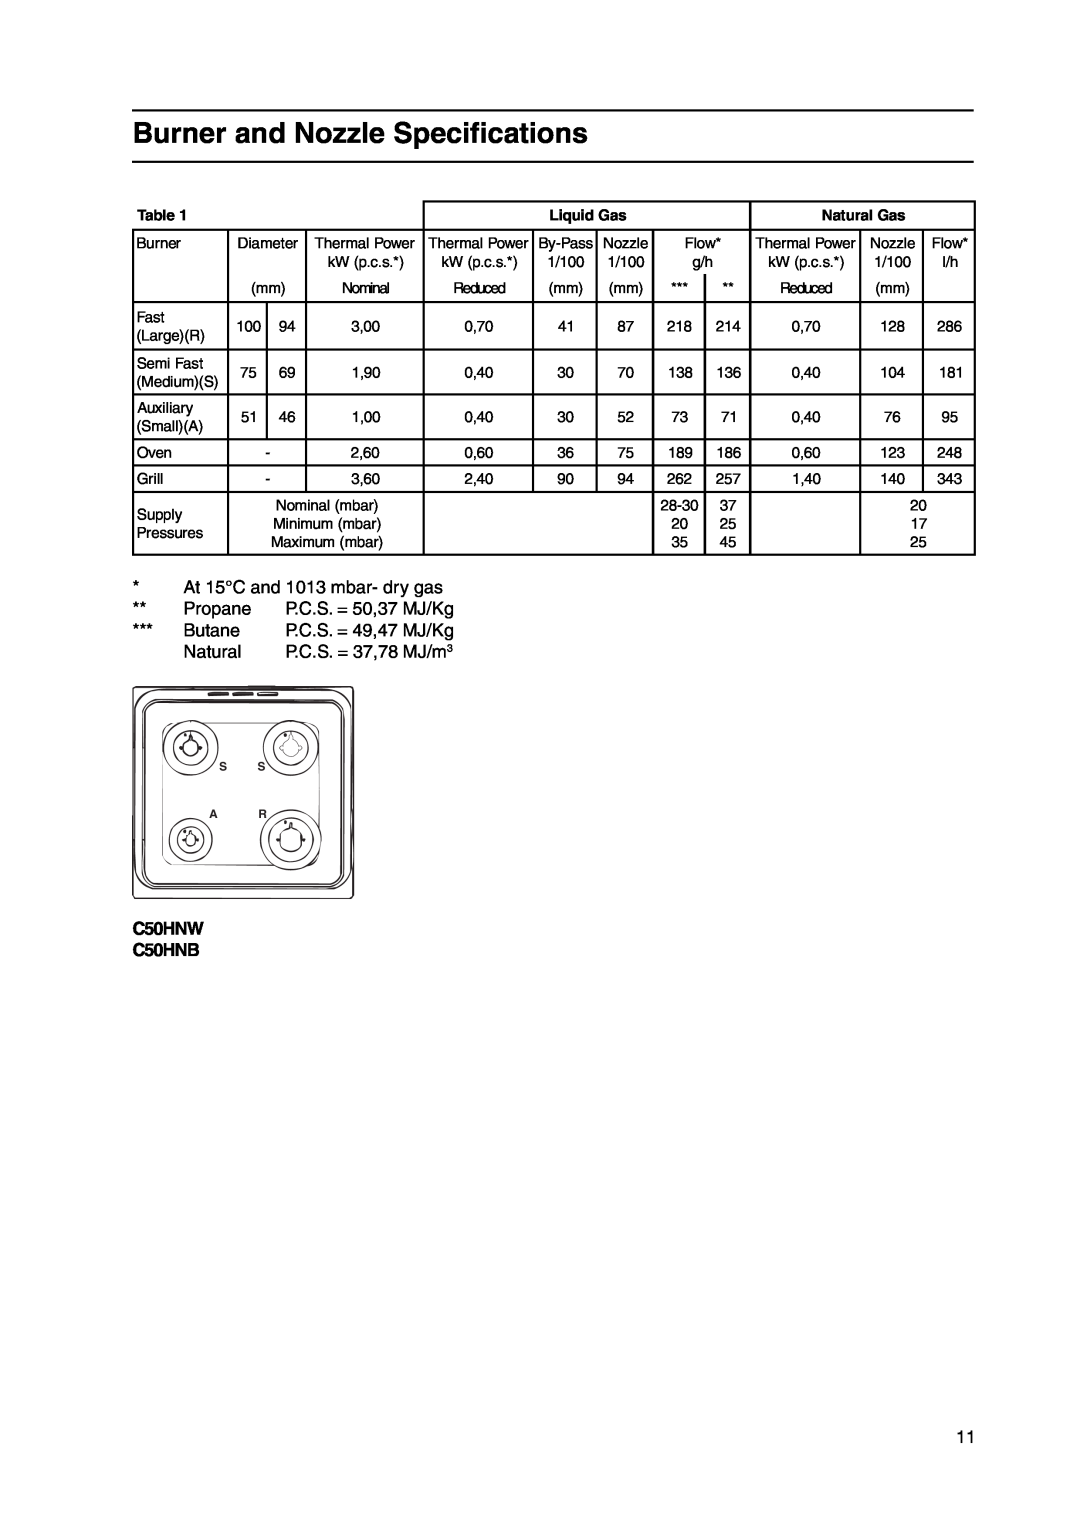 Cannon manual Burner and Nozzle Specifications, C50HNW C50HNB 